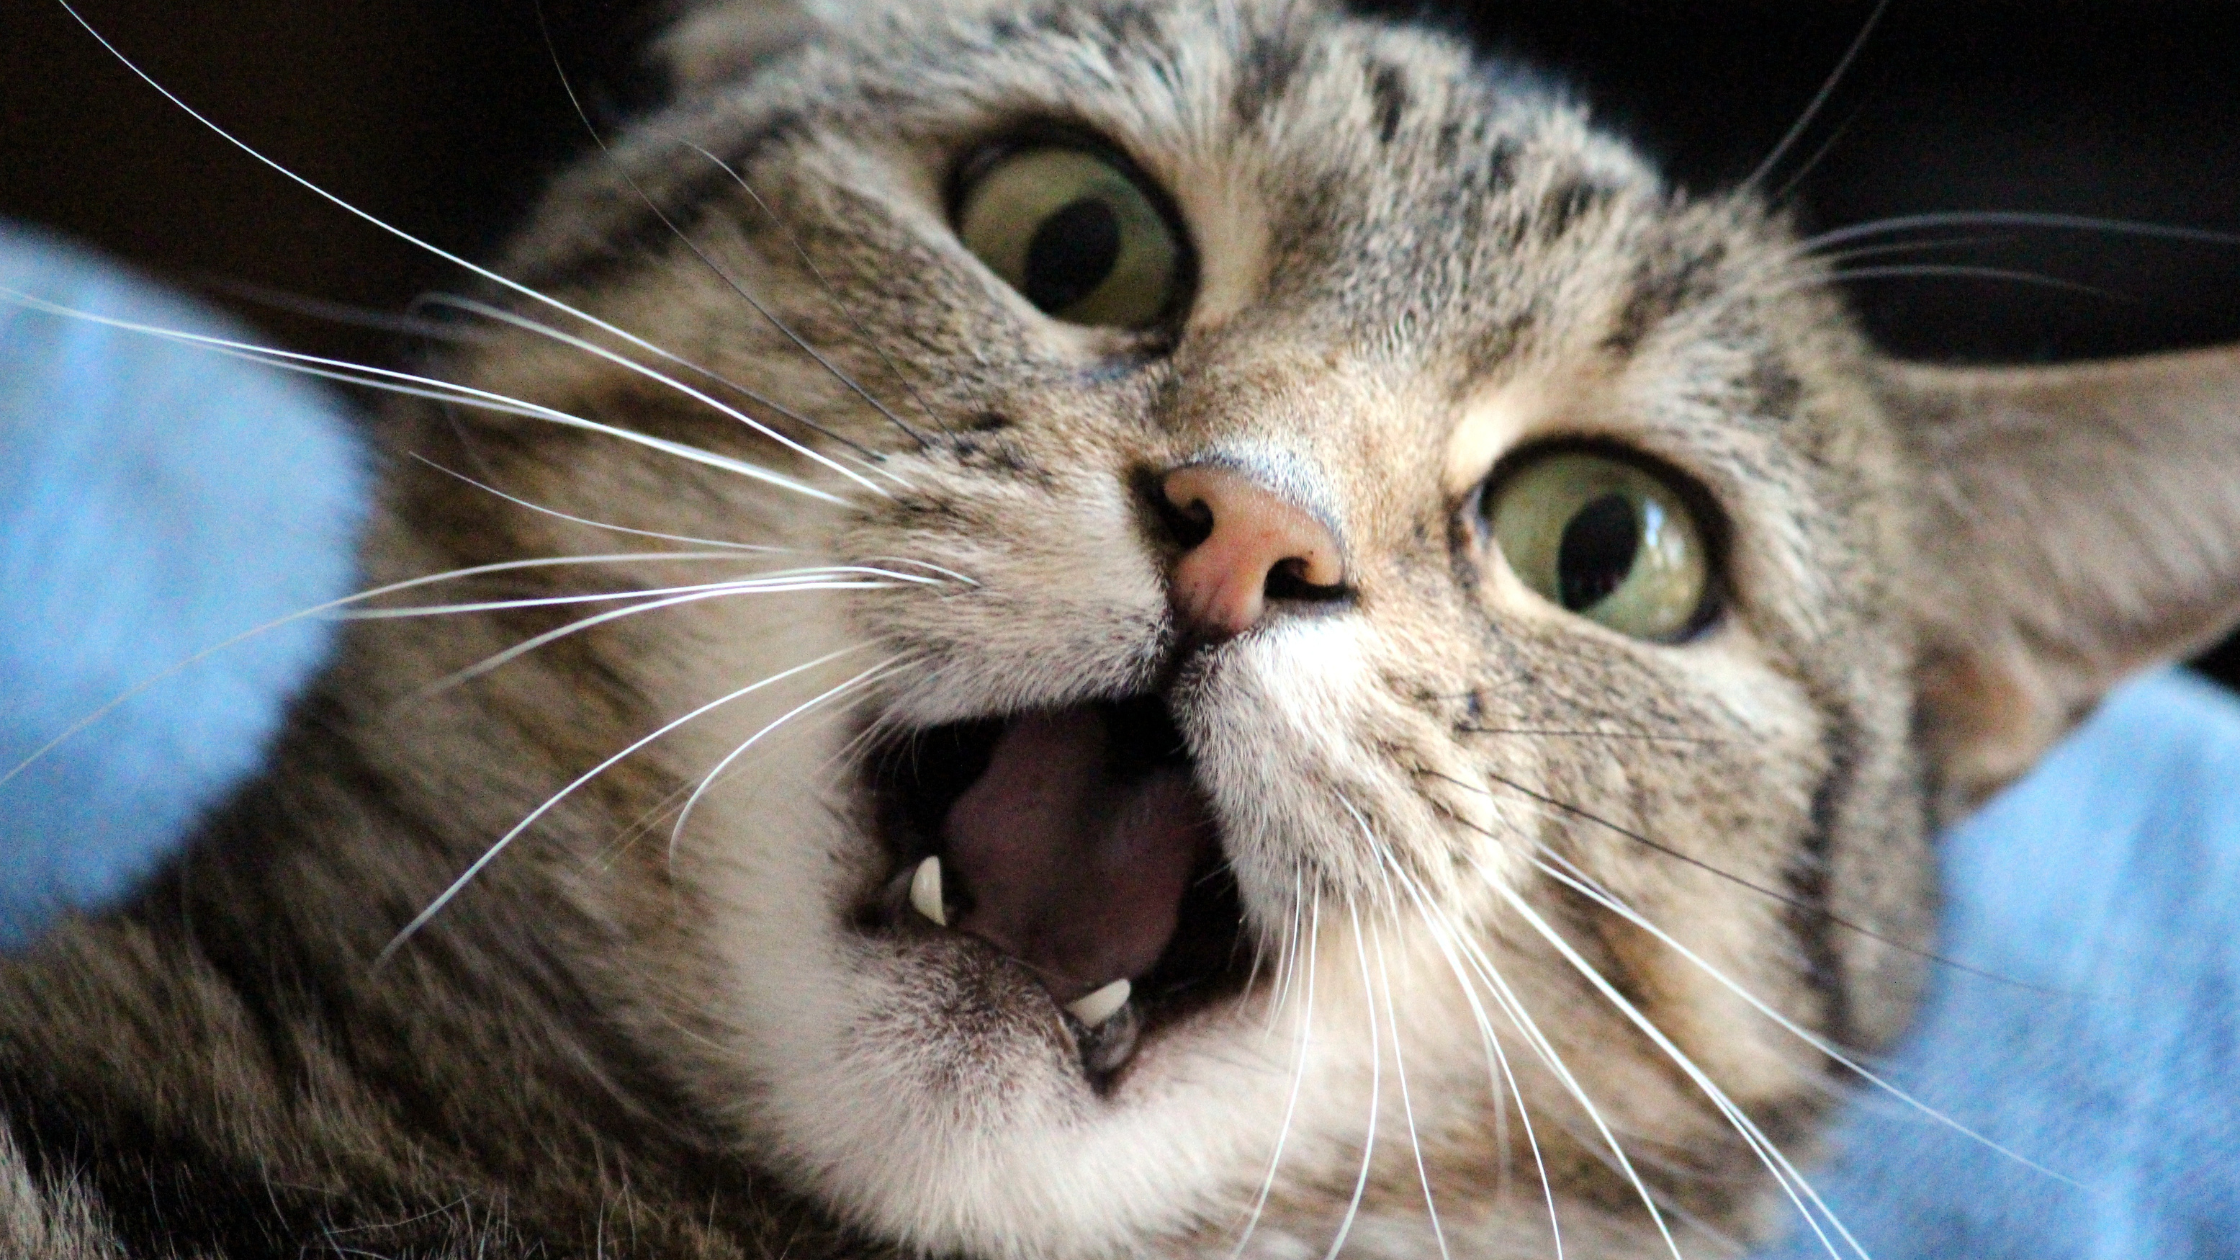 a close up of a tabby cat's face with its mouth open as if saying aaah